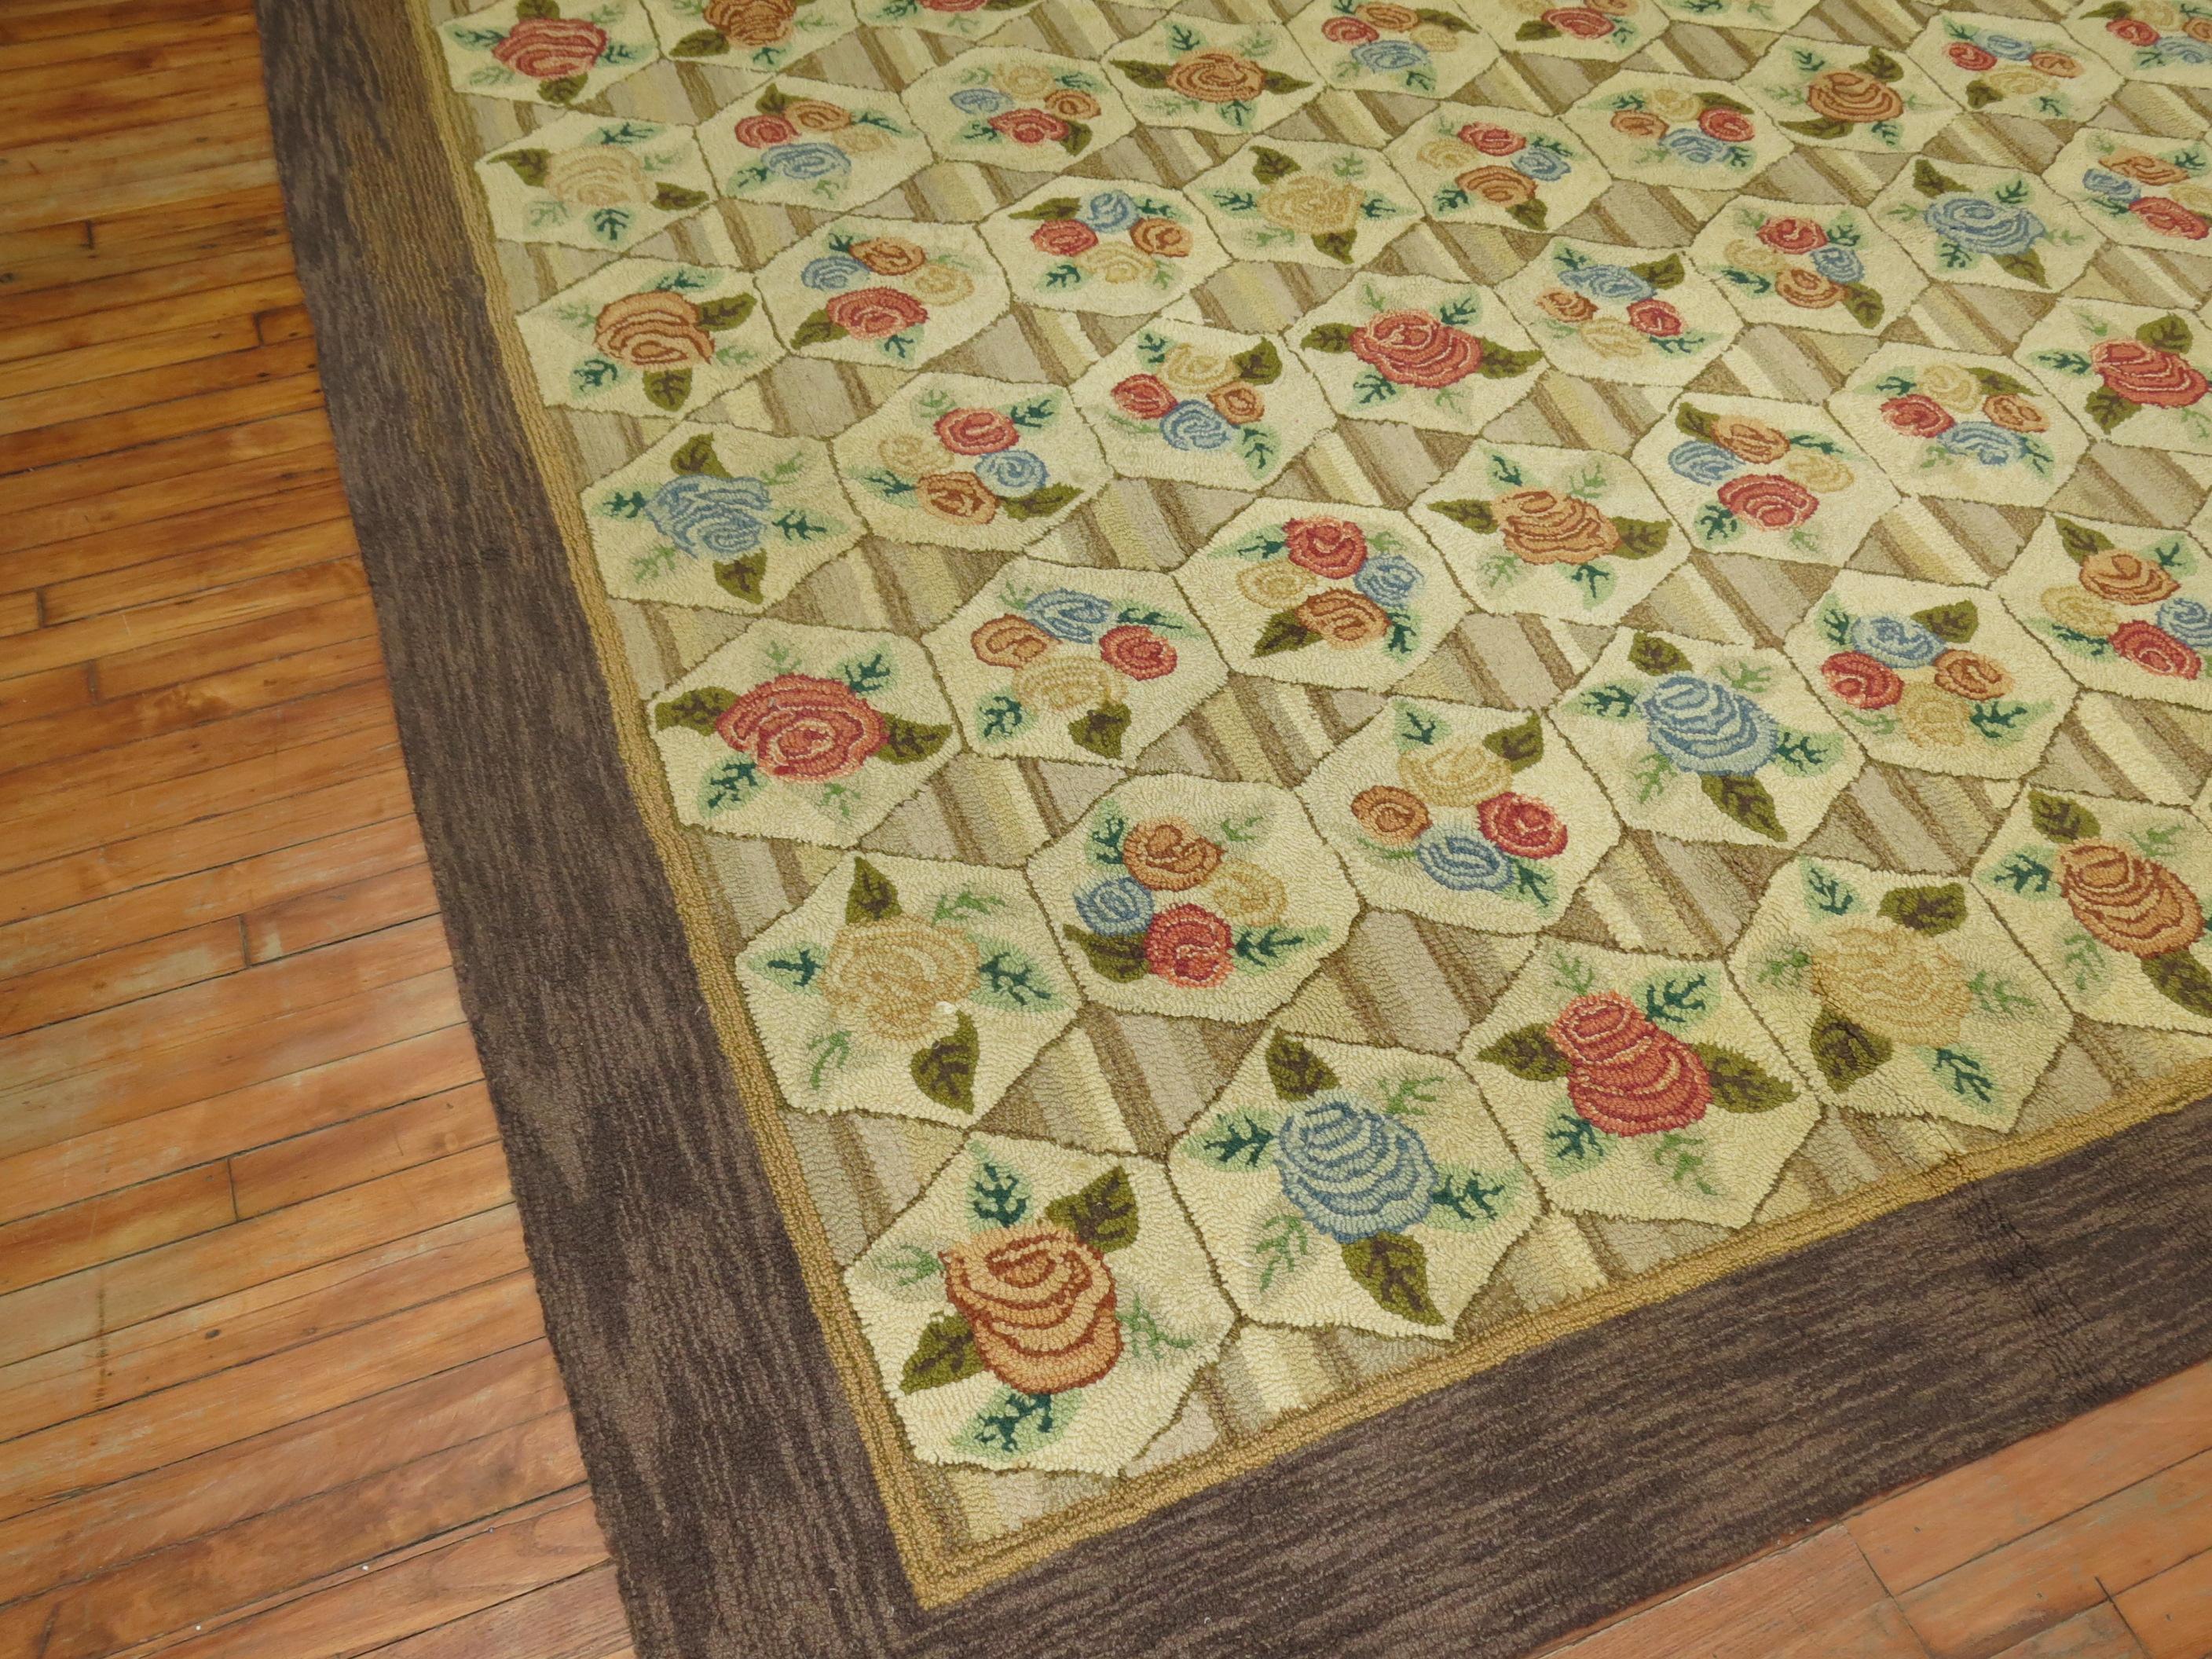 American Classical Rustic Color Floral Motif American Hooked Room Size Rug, Mid-20th Century For Sale